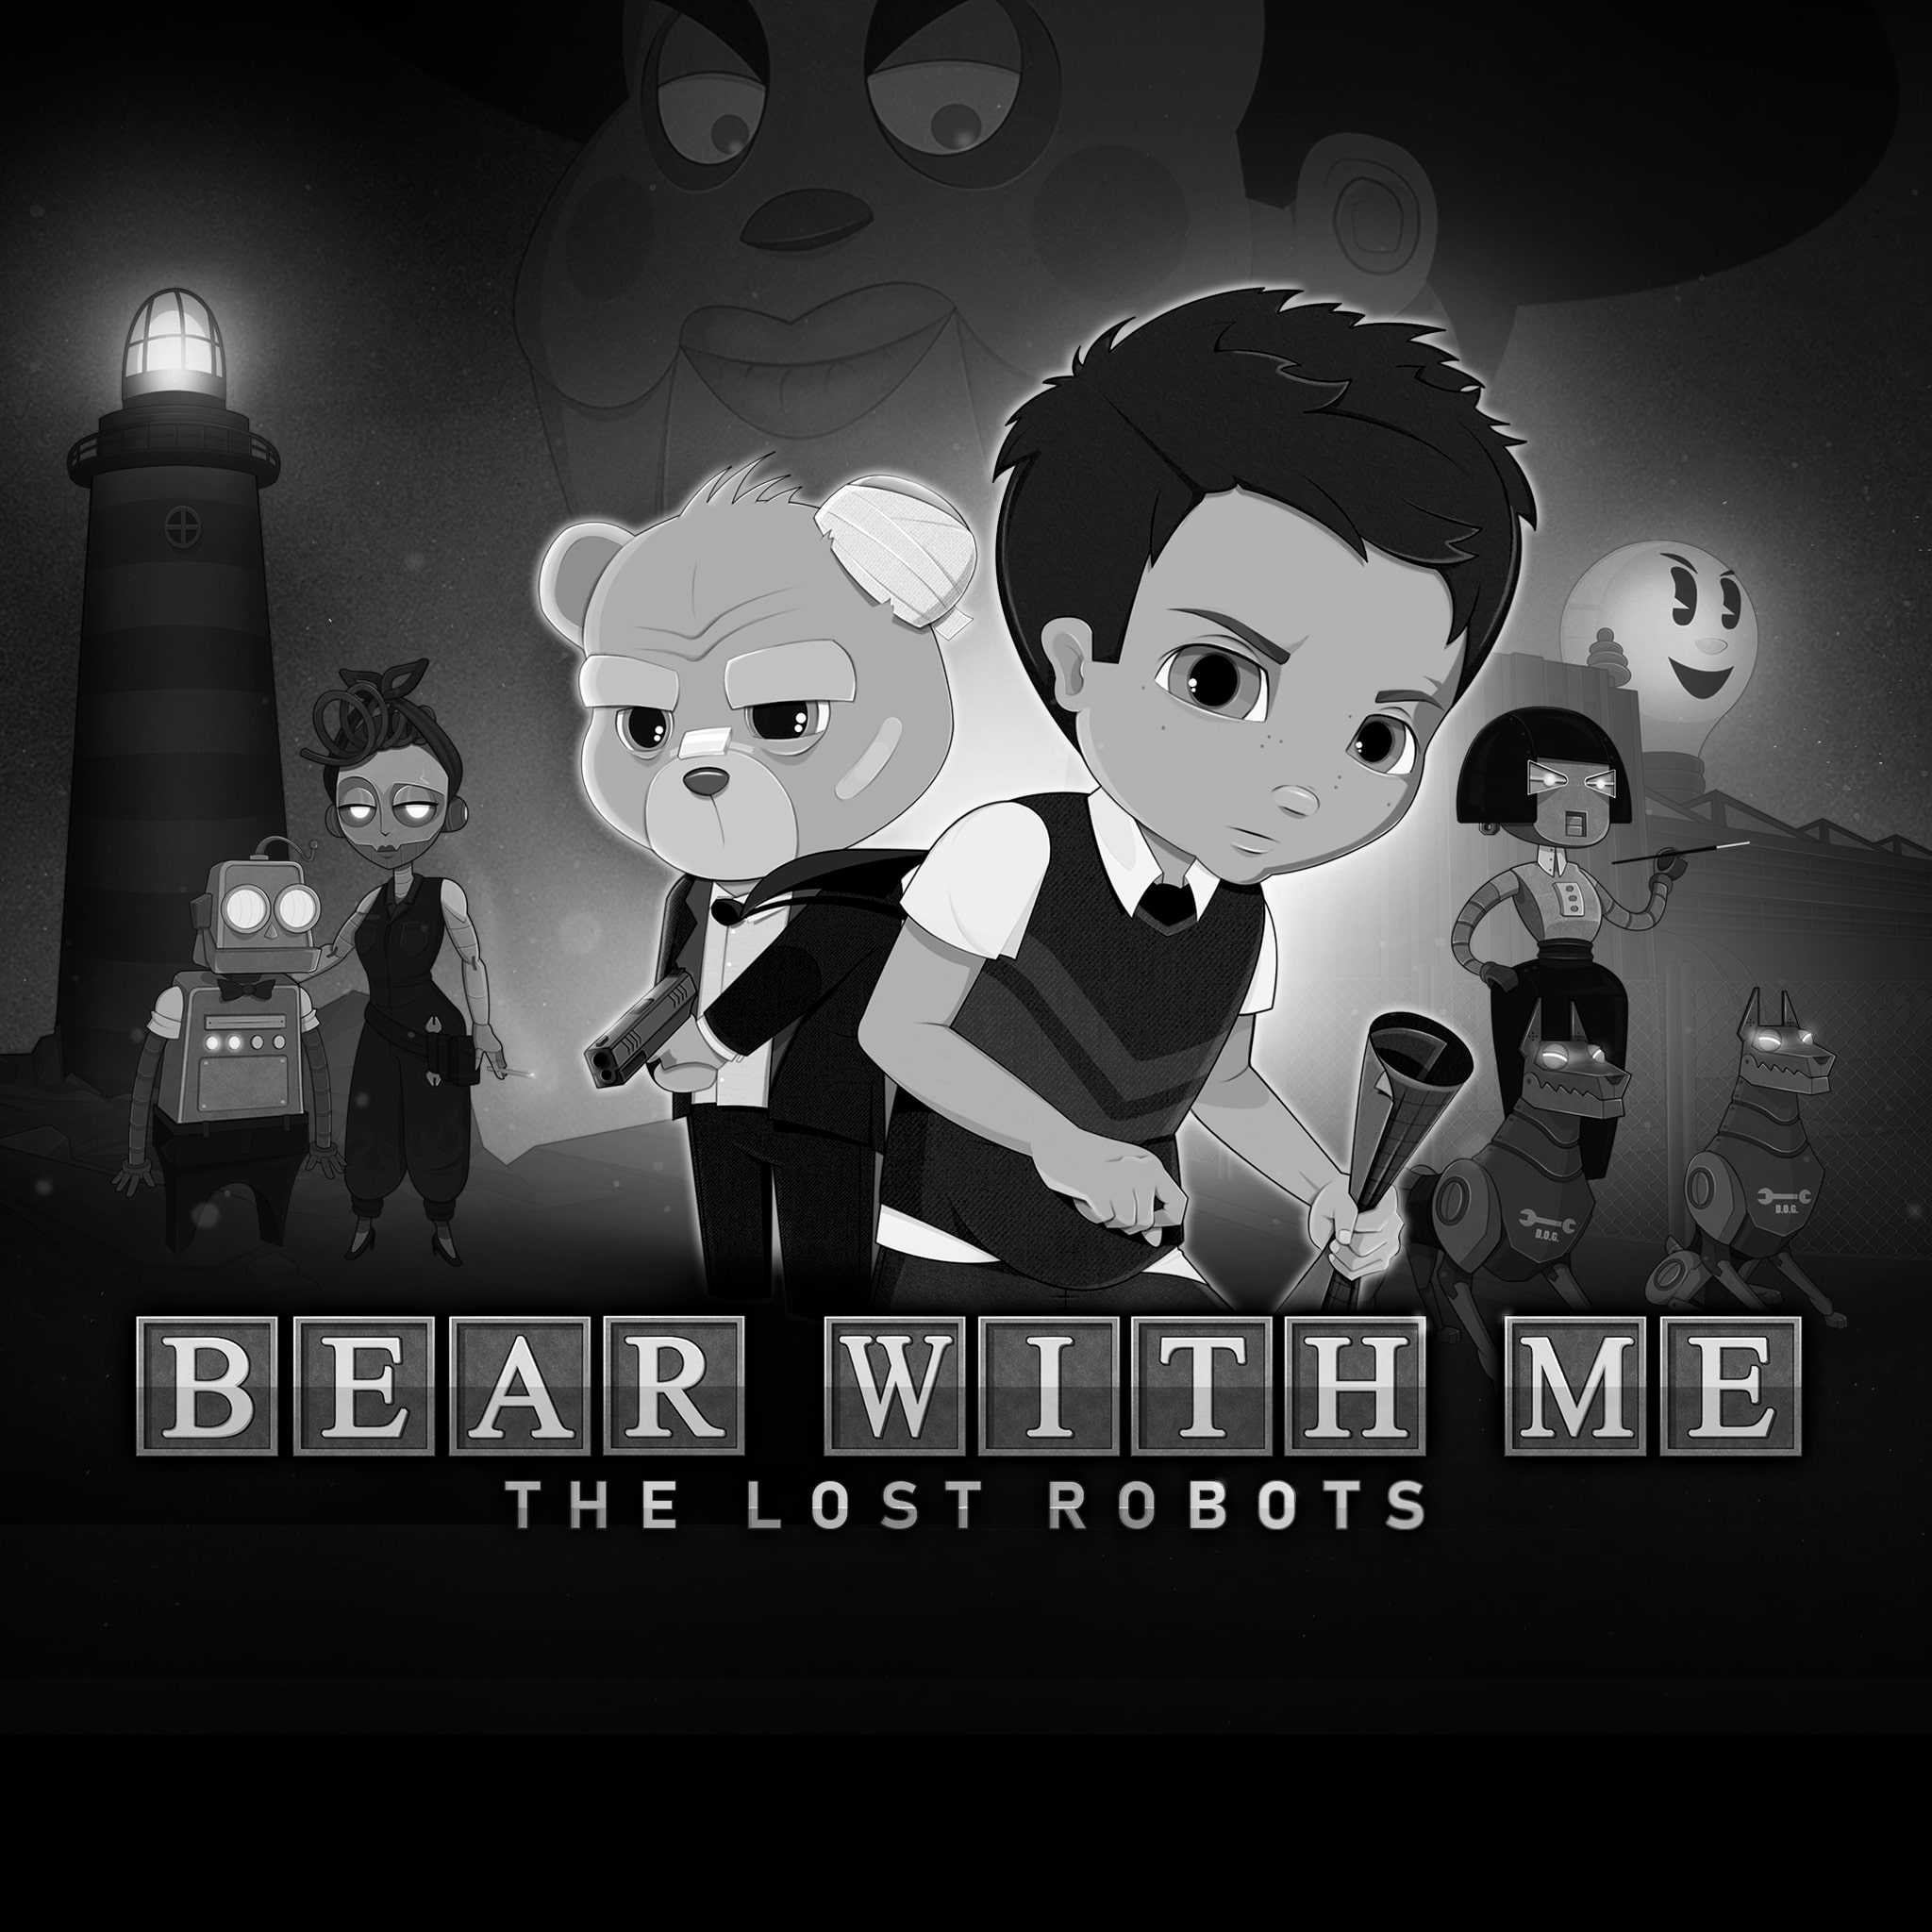 Bear With Me: The Lost Robots cover